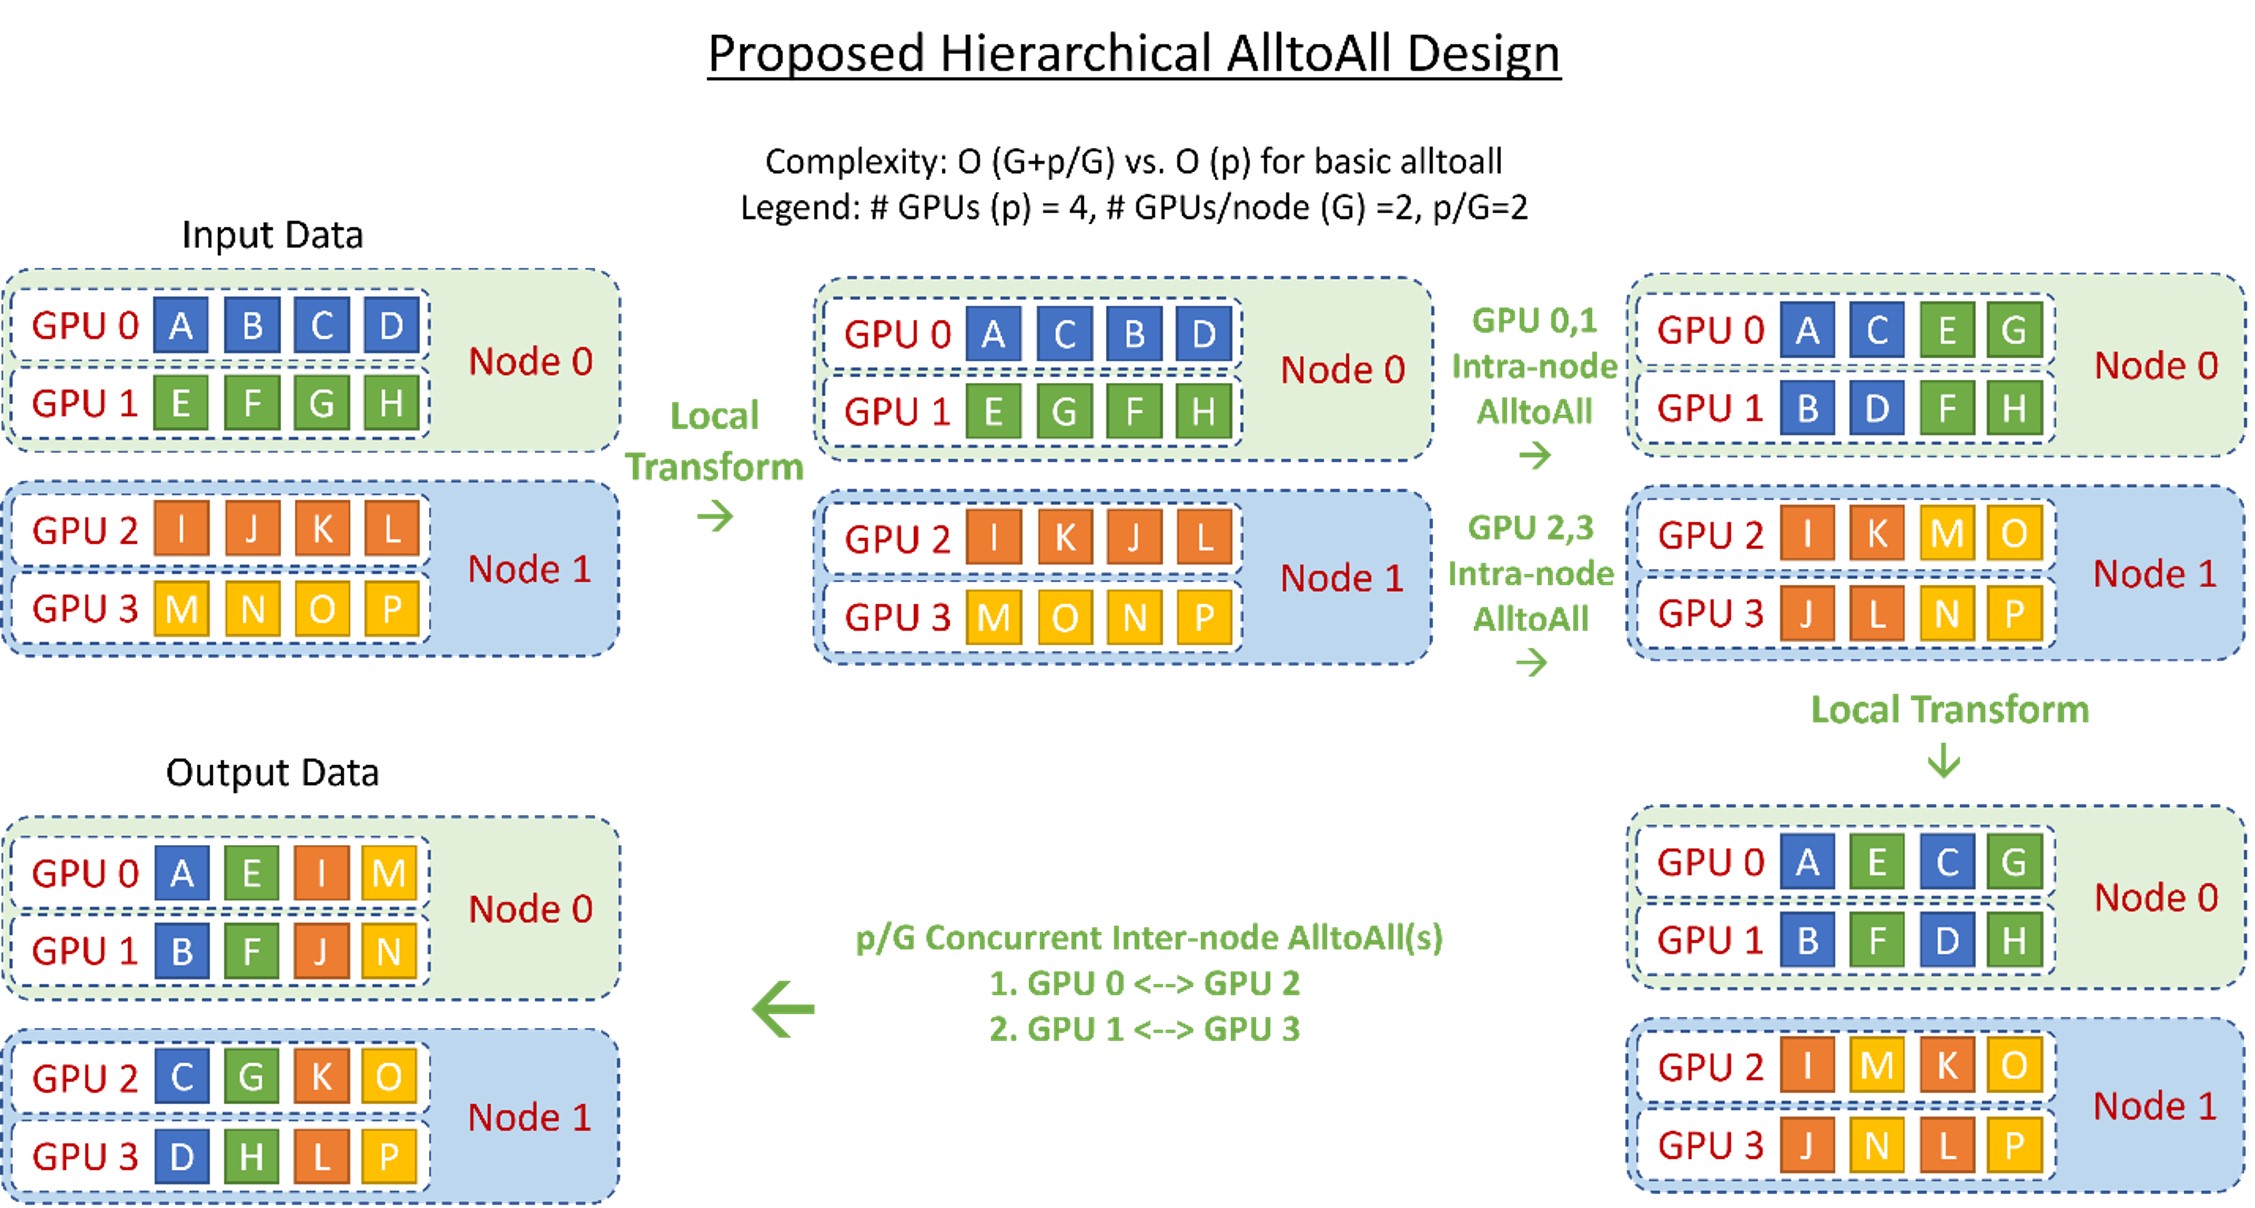 Illustration of the proposed hierarchical all-to-all design